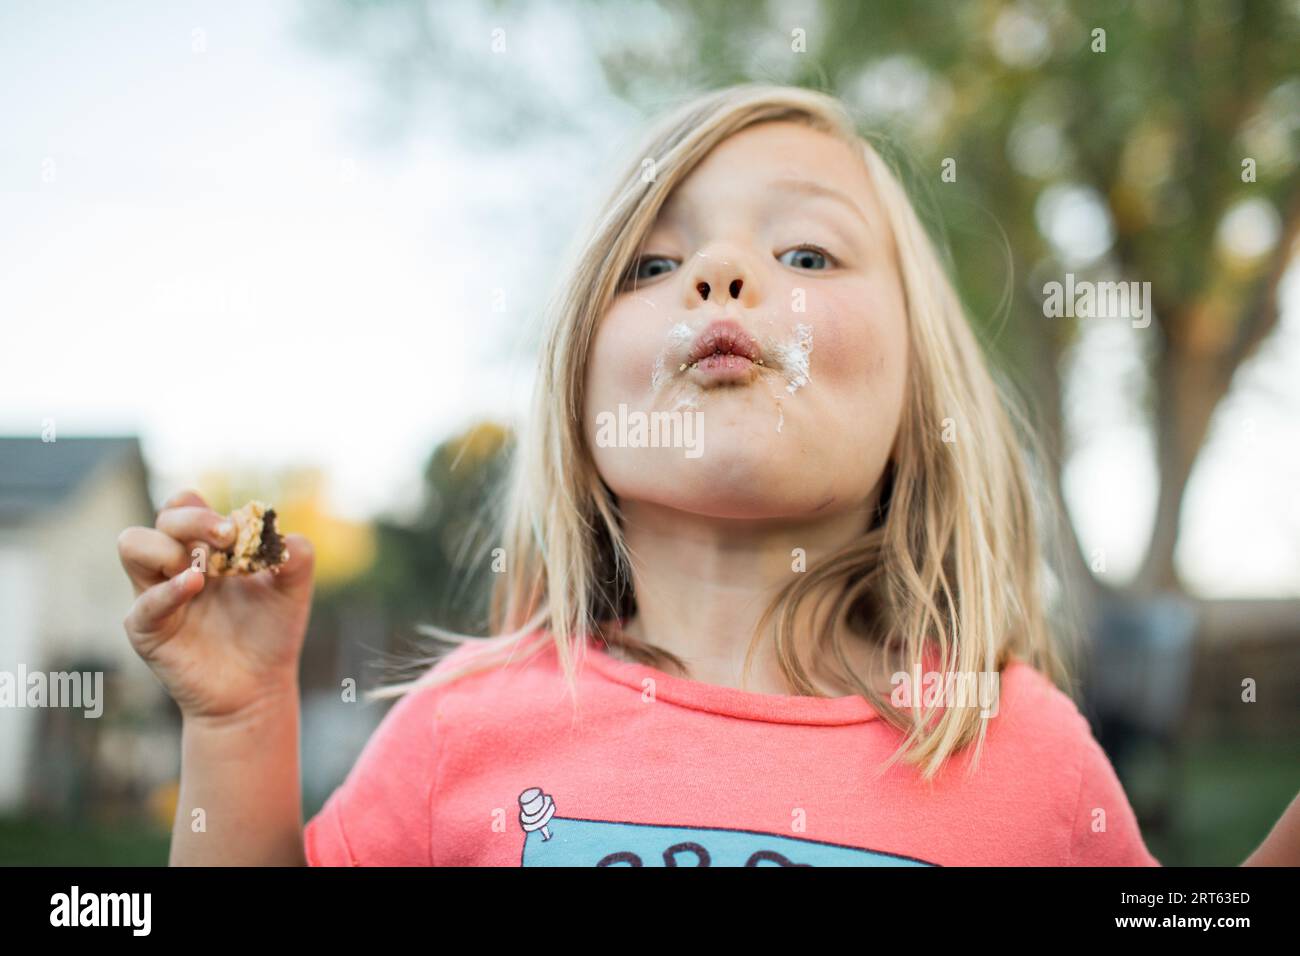 Toddler with messy s’more face shows off treat. Stock Photo